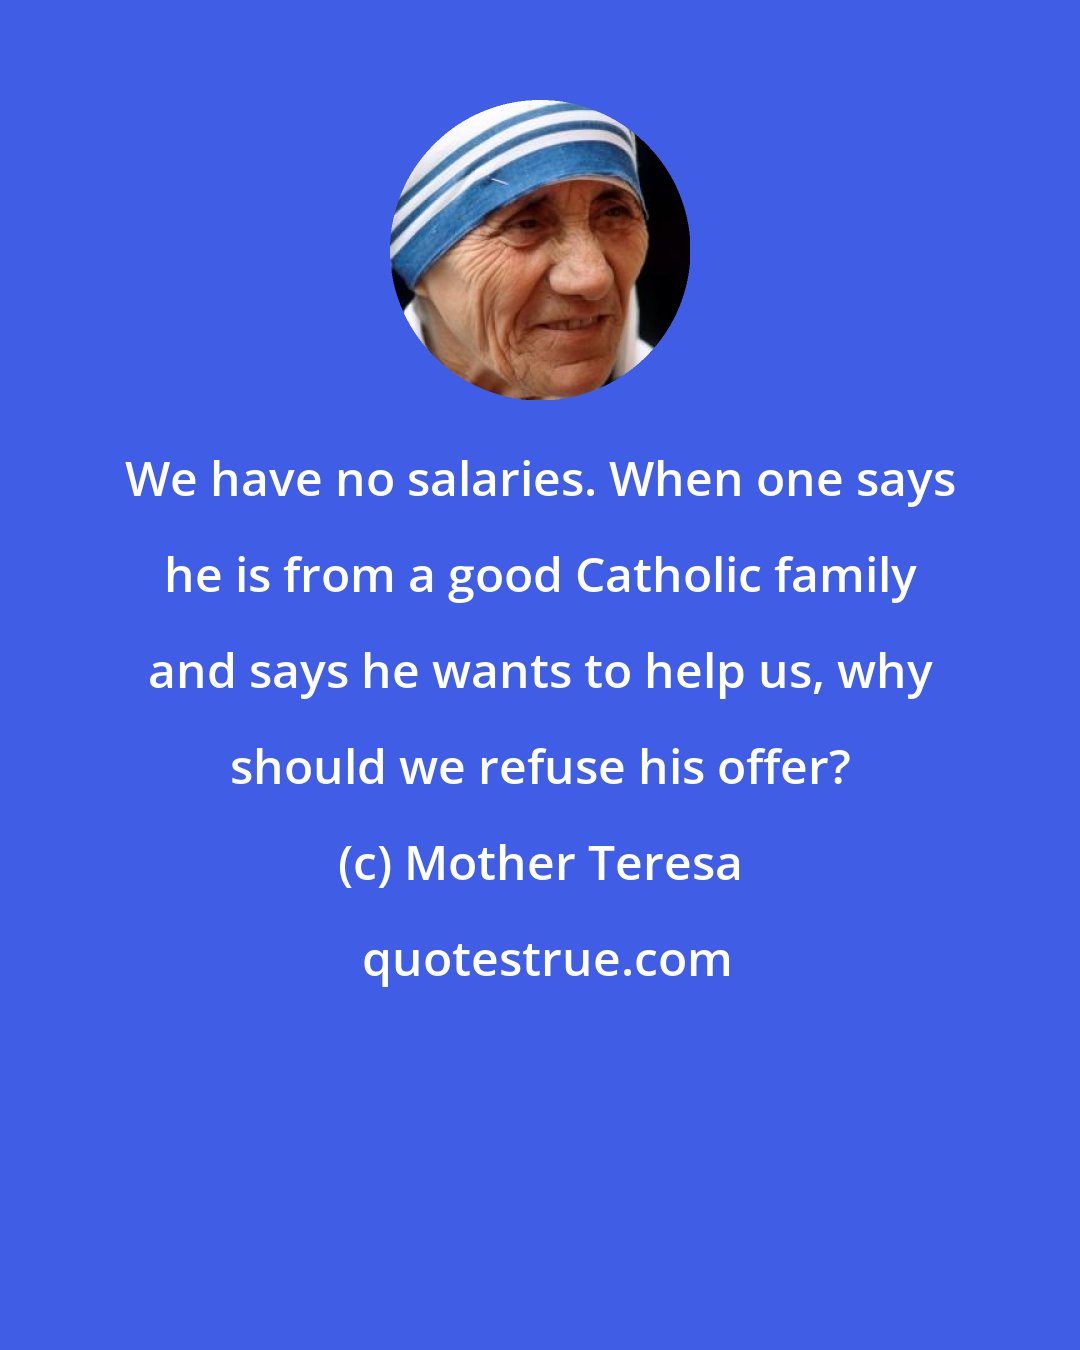 Mother Teresa: We have no salaries. When one says he is from a good Catholic family and says he wants to help us, why should we refuse his offer?